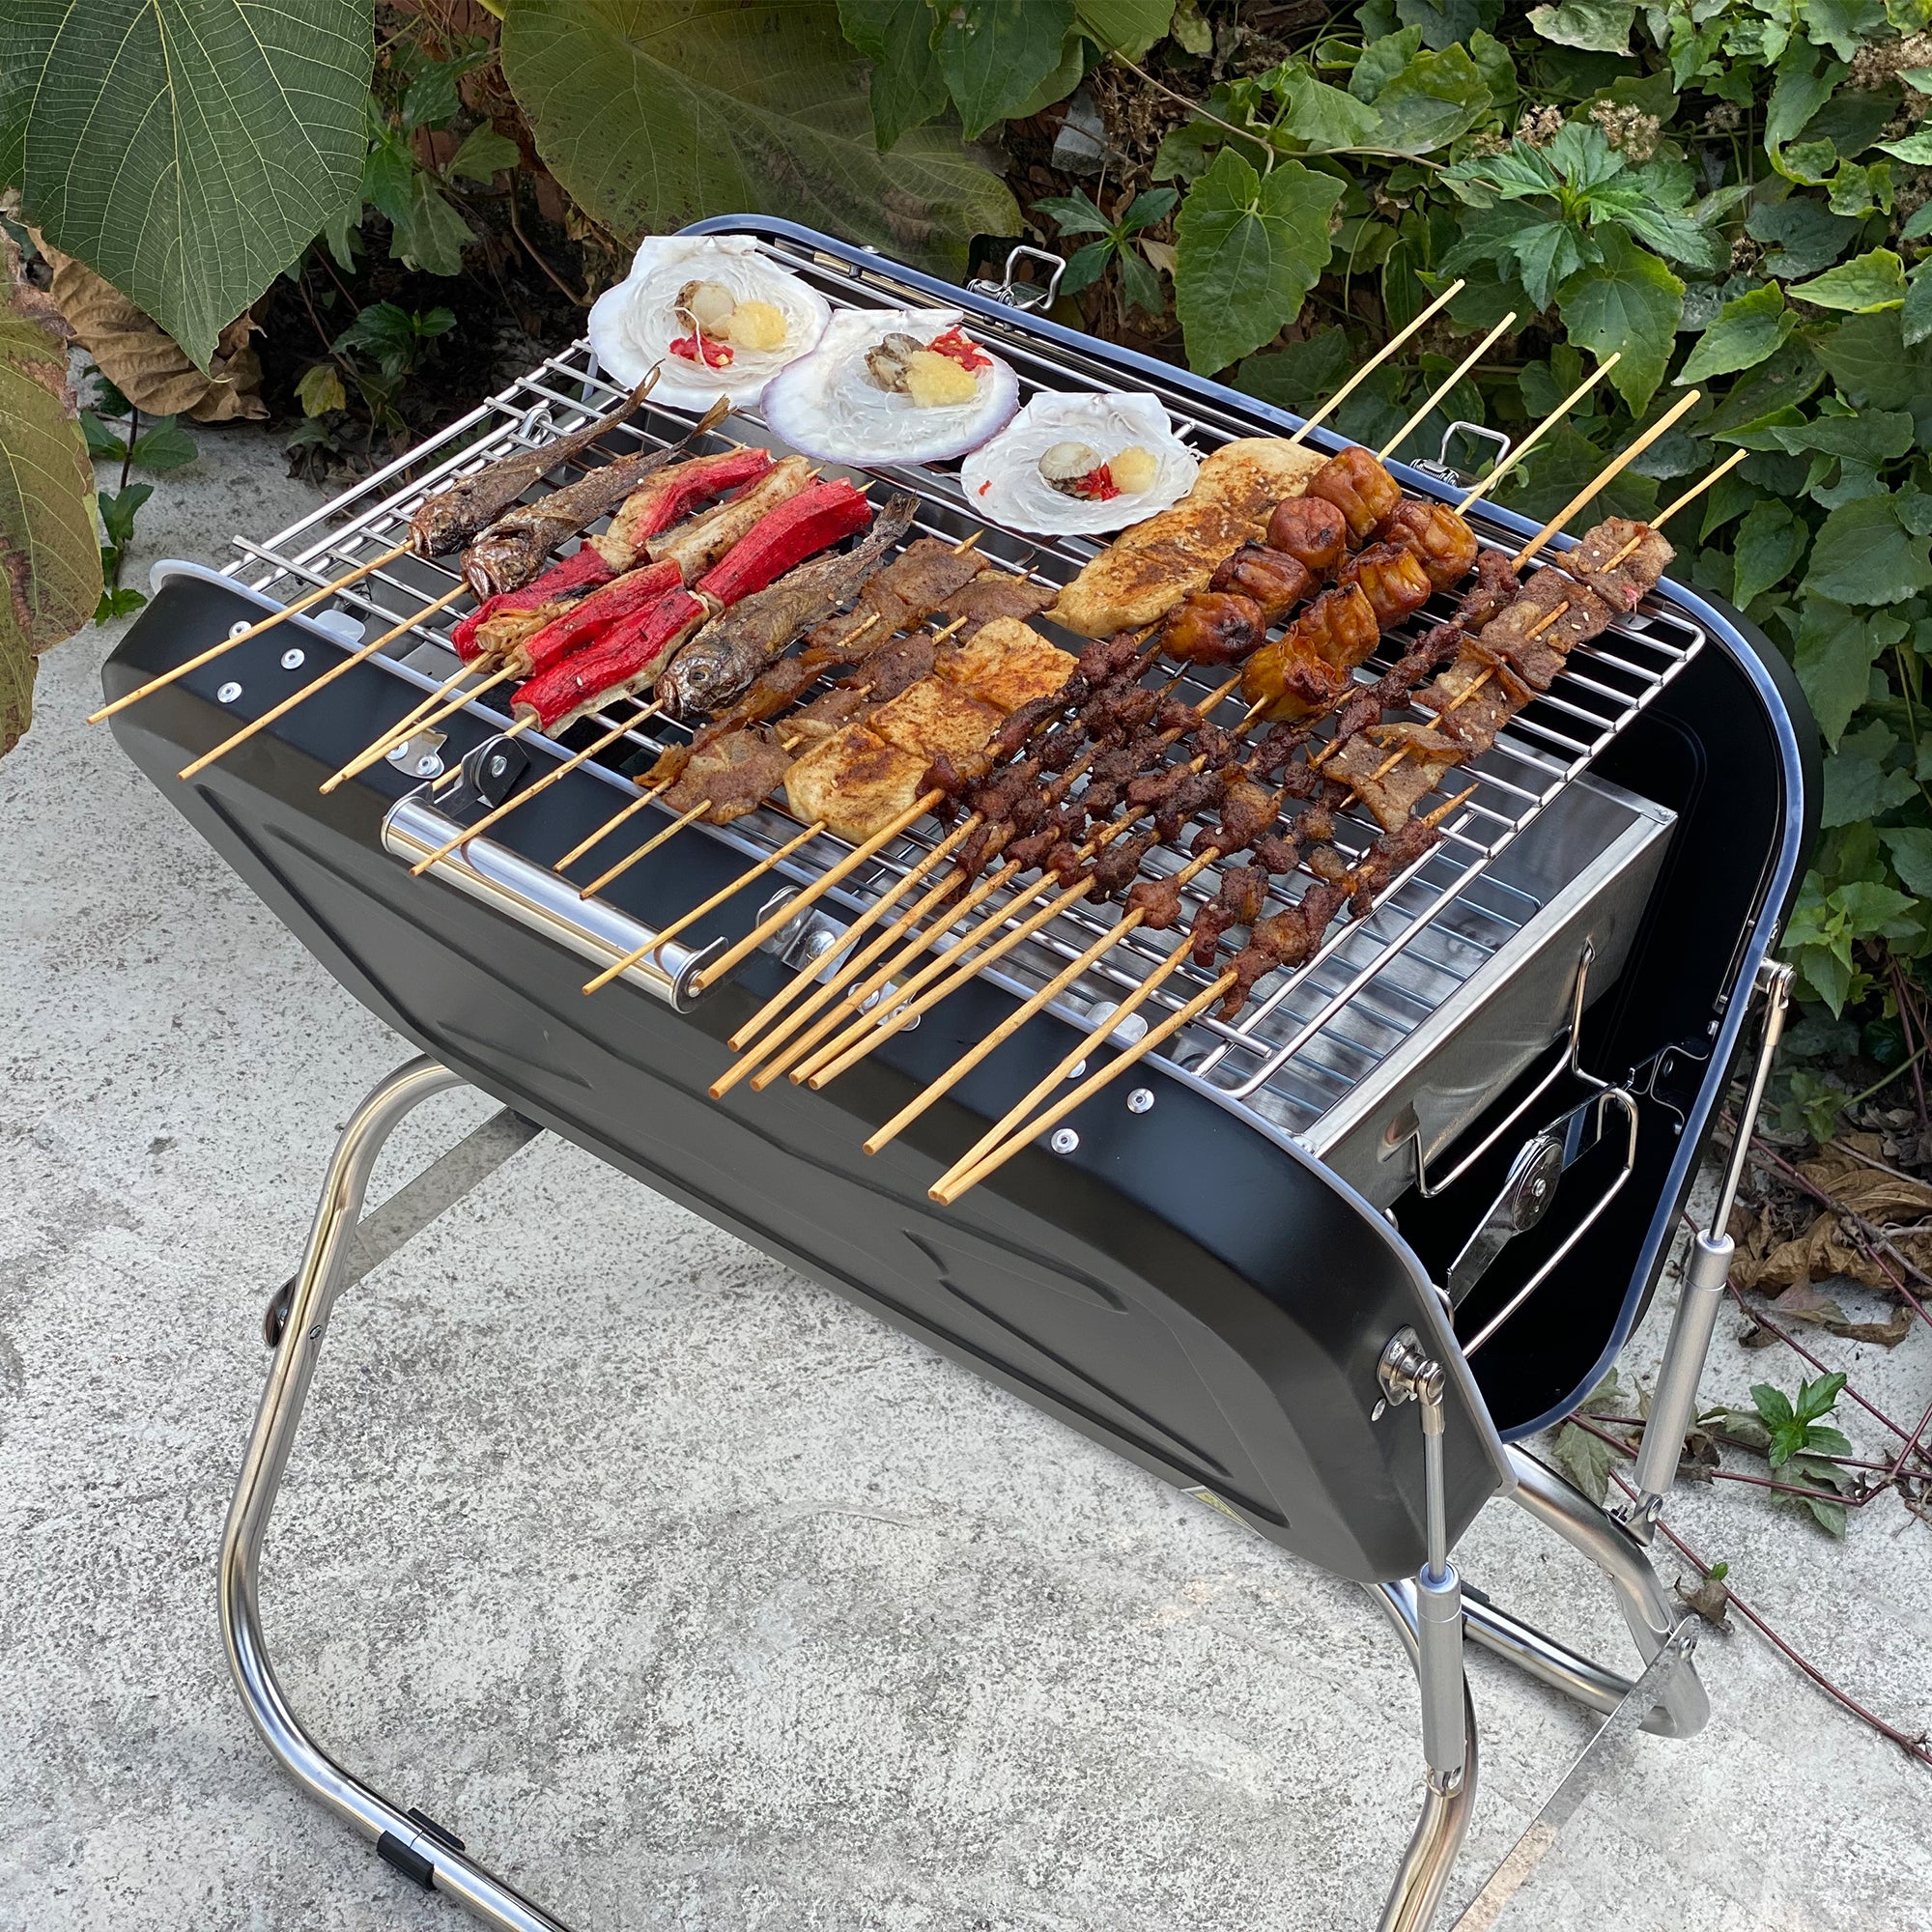 RaDEWAY Collapsible and portable Handle design BBQ grill for Outdoor BBQ